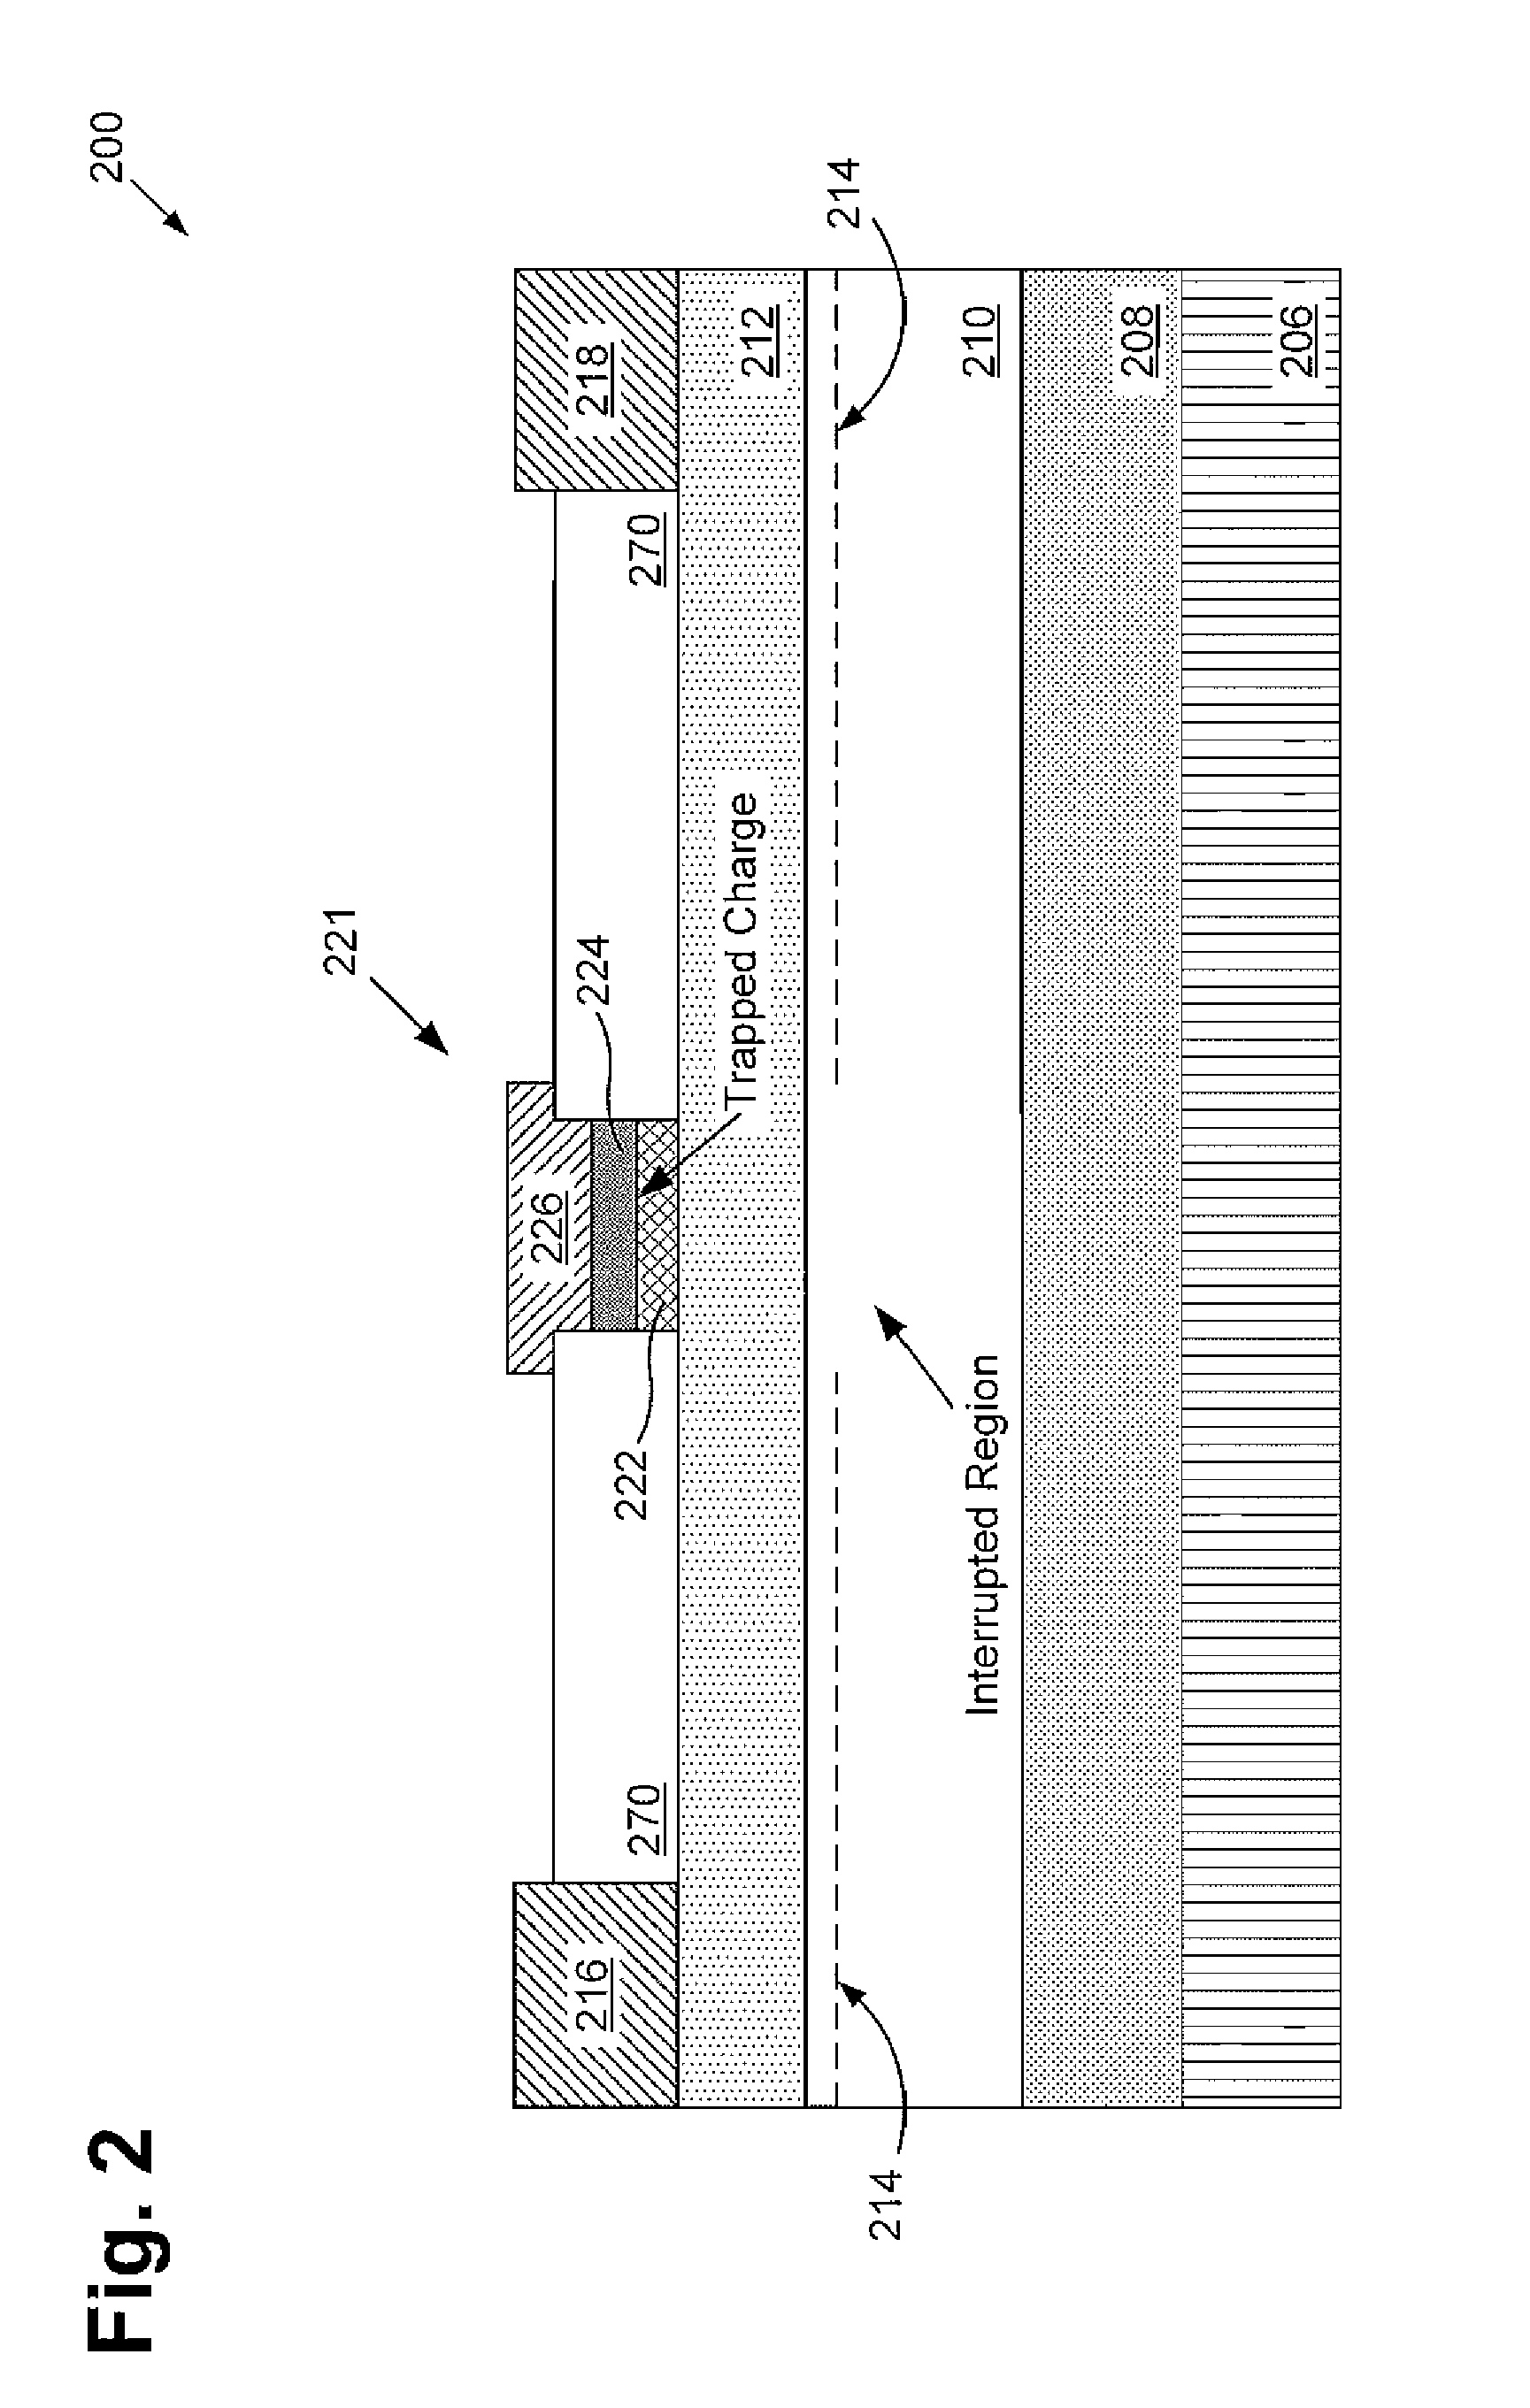 Enhancement Mode III-Nitride Transistors with Single Gate Dielectric Structure